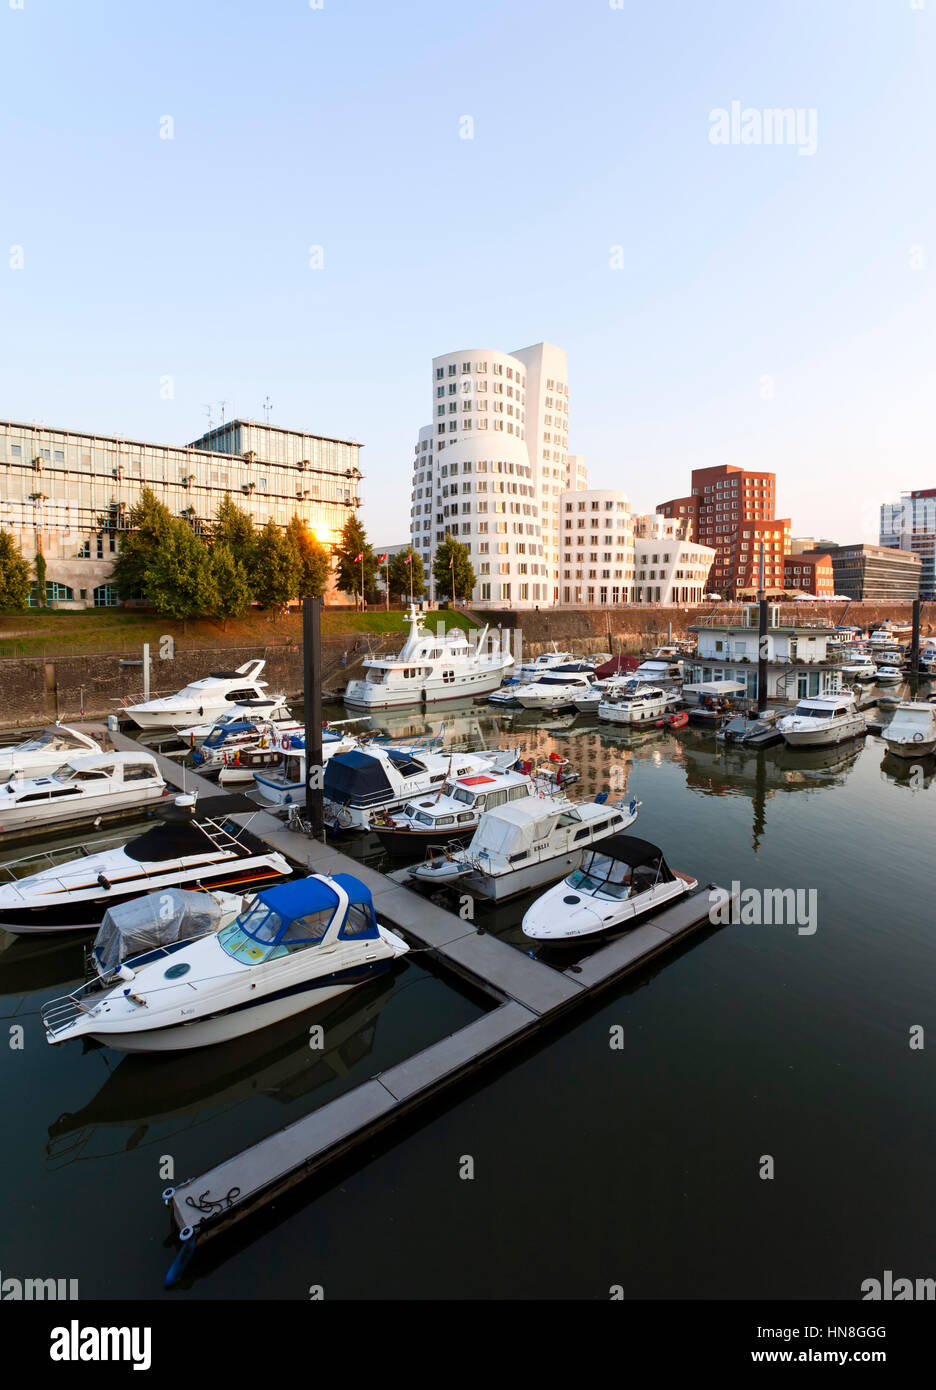 Dusseldorf, Germany - July 4, 2009: Frank Owen Gehry's Neuer Zollhof buildings at the MedienHafen with the marina in foreground Stock Photo